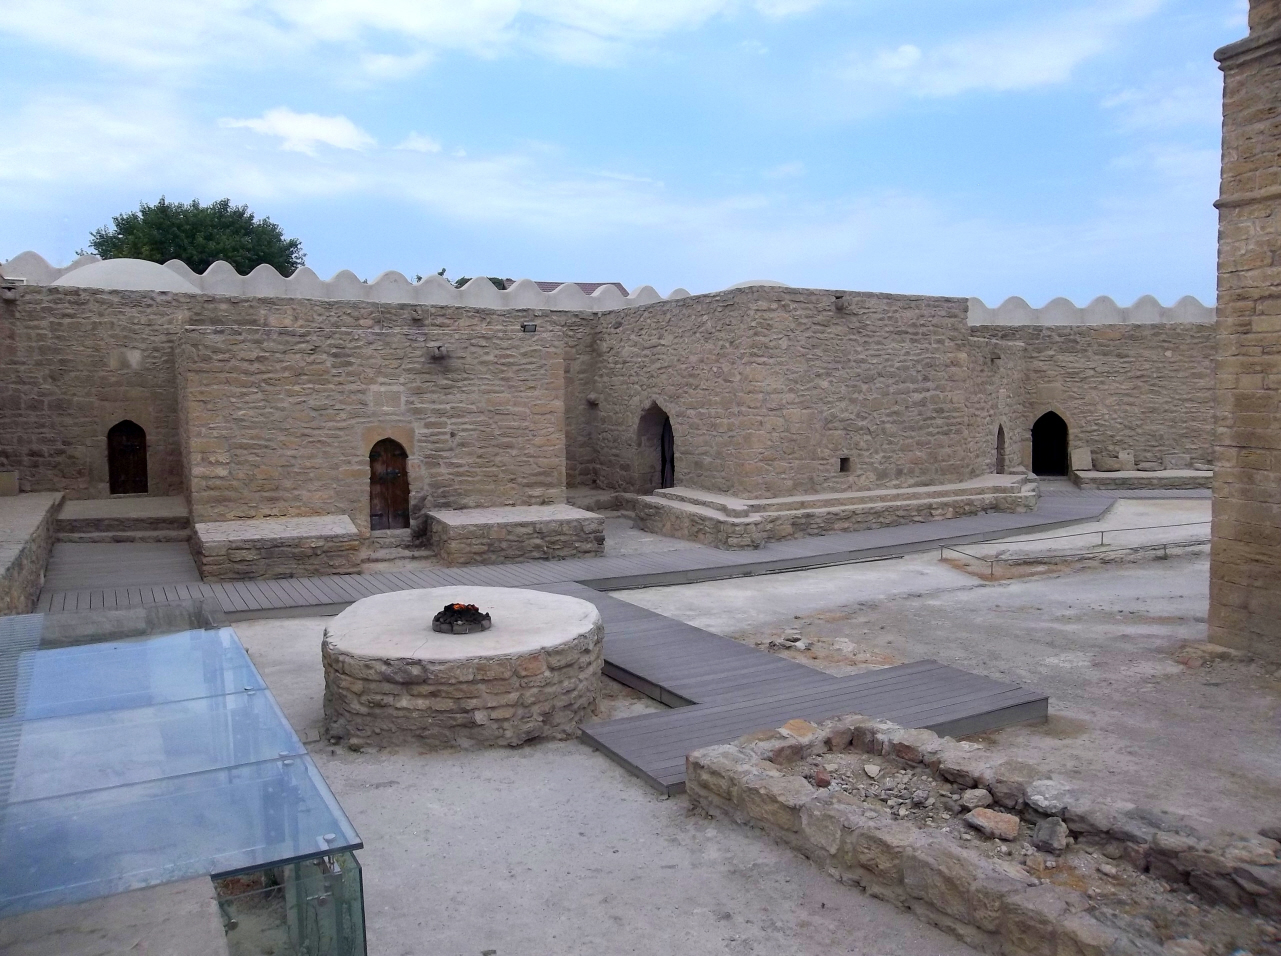 Ateshgah Fire Temple Fires Came from Natural Gas Below the Ground - Zoroasrian (7th-10th Cen)  (Hindu 18th Cen.) - Azerbaijan